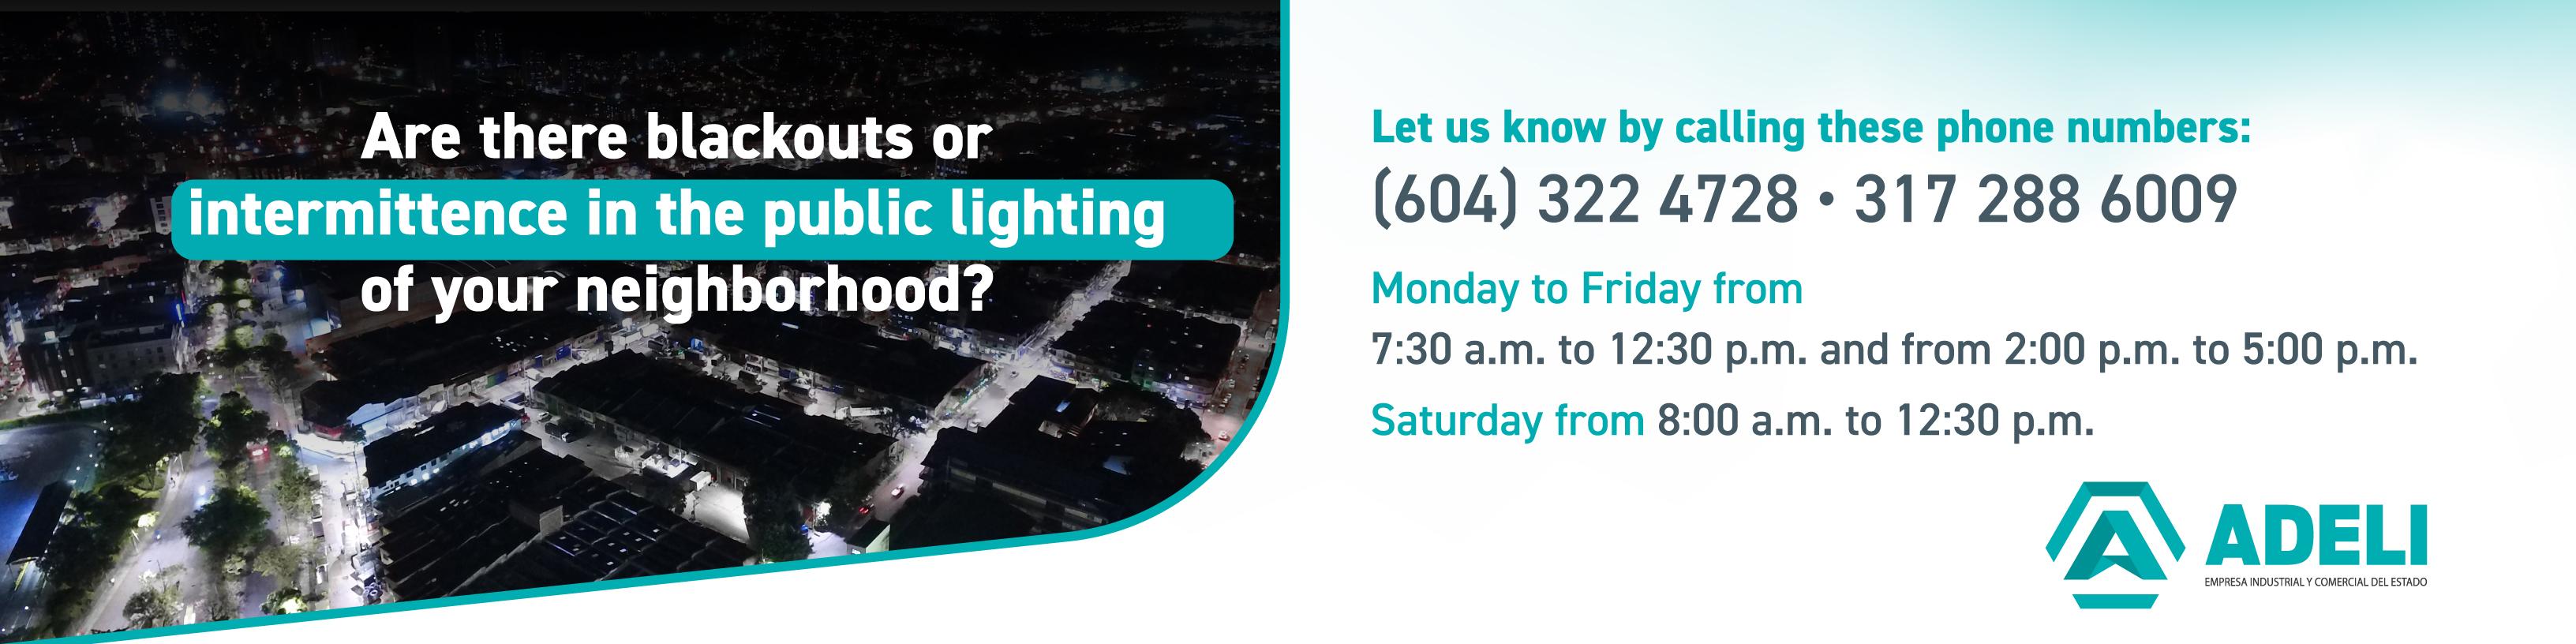 Are there problems with public lighting in your area? Report them to 604 322 4728